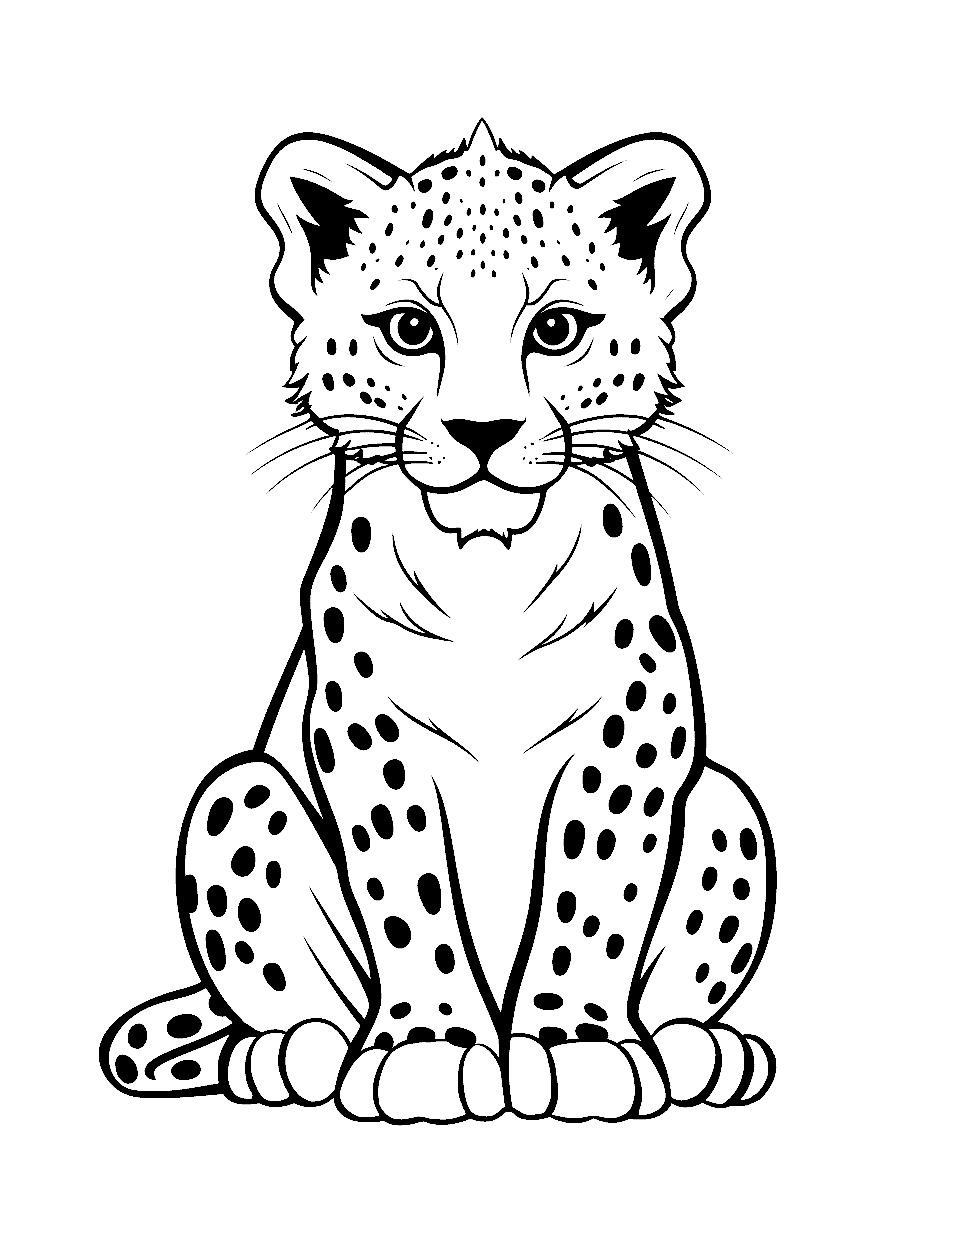 King Cheetah in Regal Pose Coloring Page - A majestic cheetah sitting like a king with a regal expression.